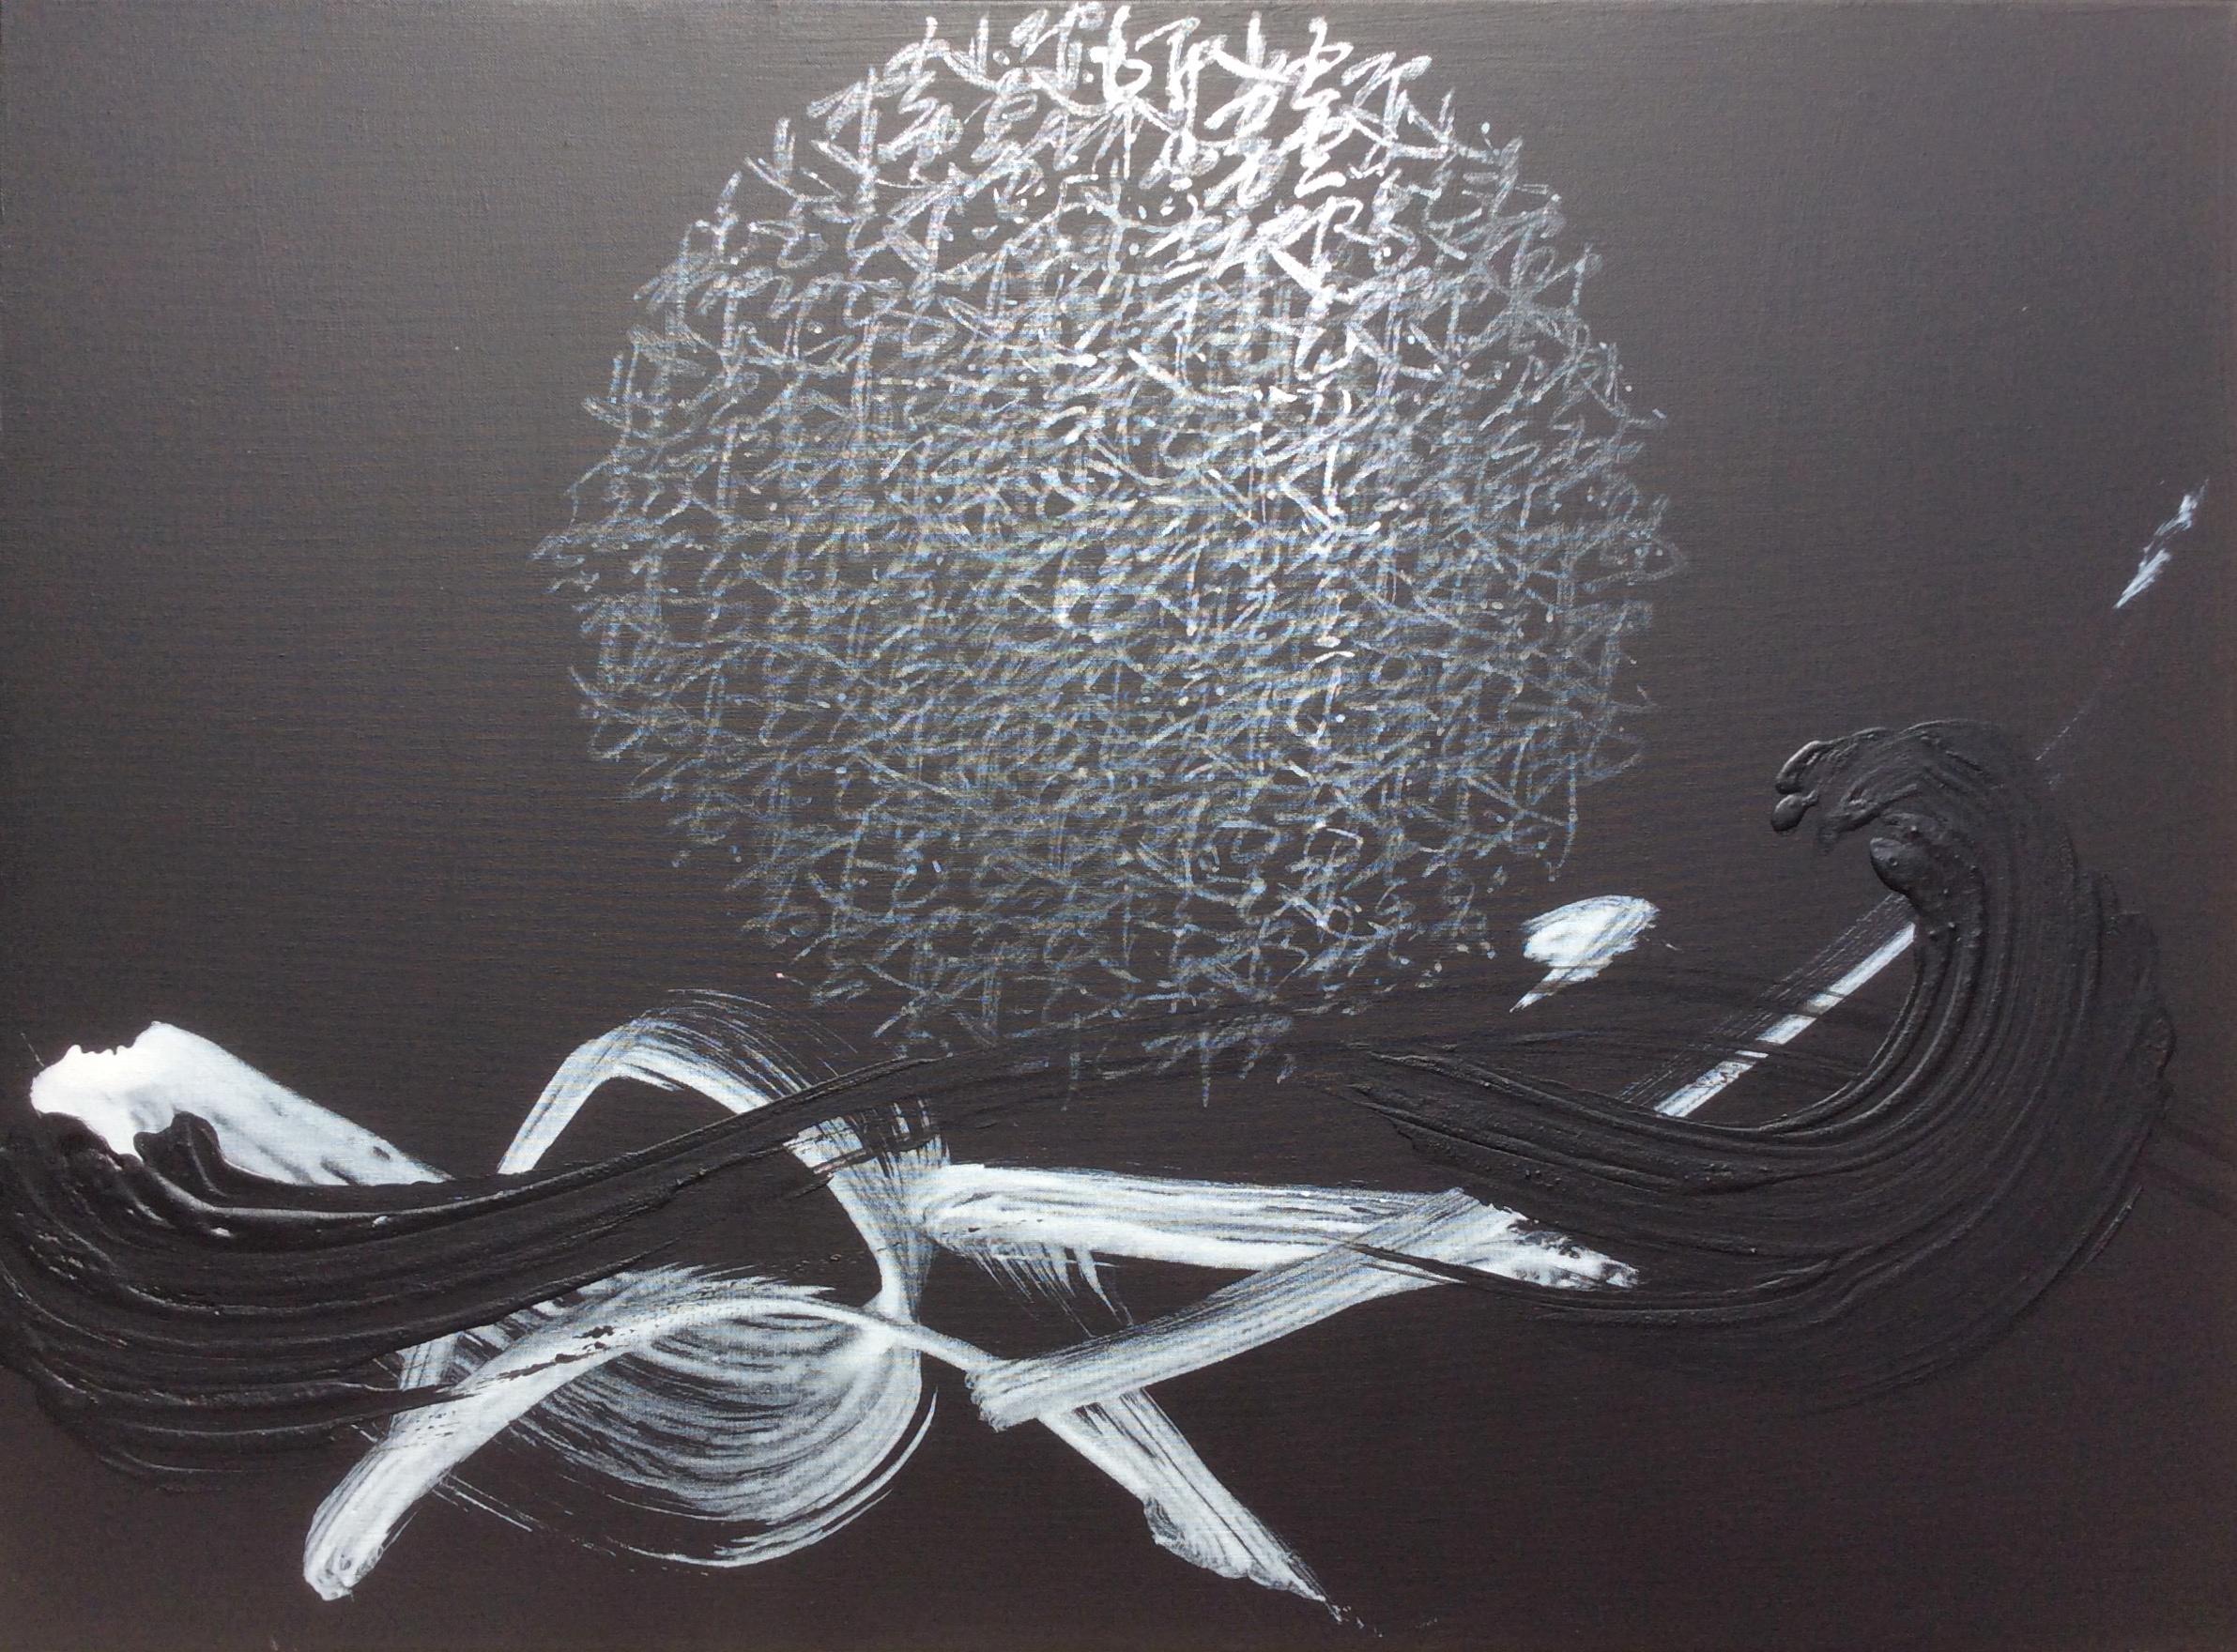 TN 681 is a unique painting by Japanese contemporary artist Hachiro Kanno. The painting is made with ink and acrylic on canvas, dimensions are 73 × 100 cm (28.7 × 39.4 in). The artwork is signed, sold unframed and comes with a certificate of